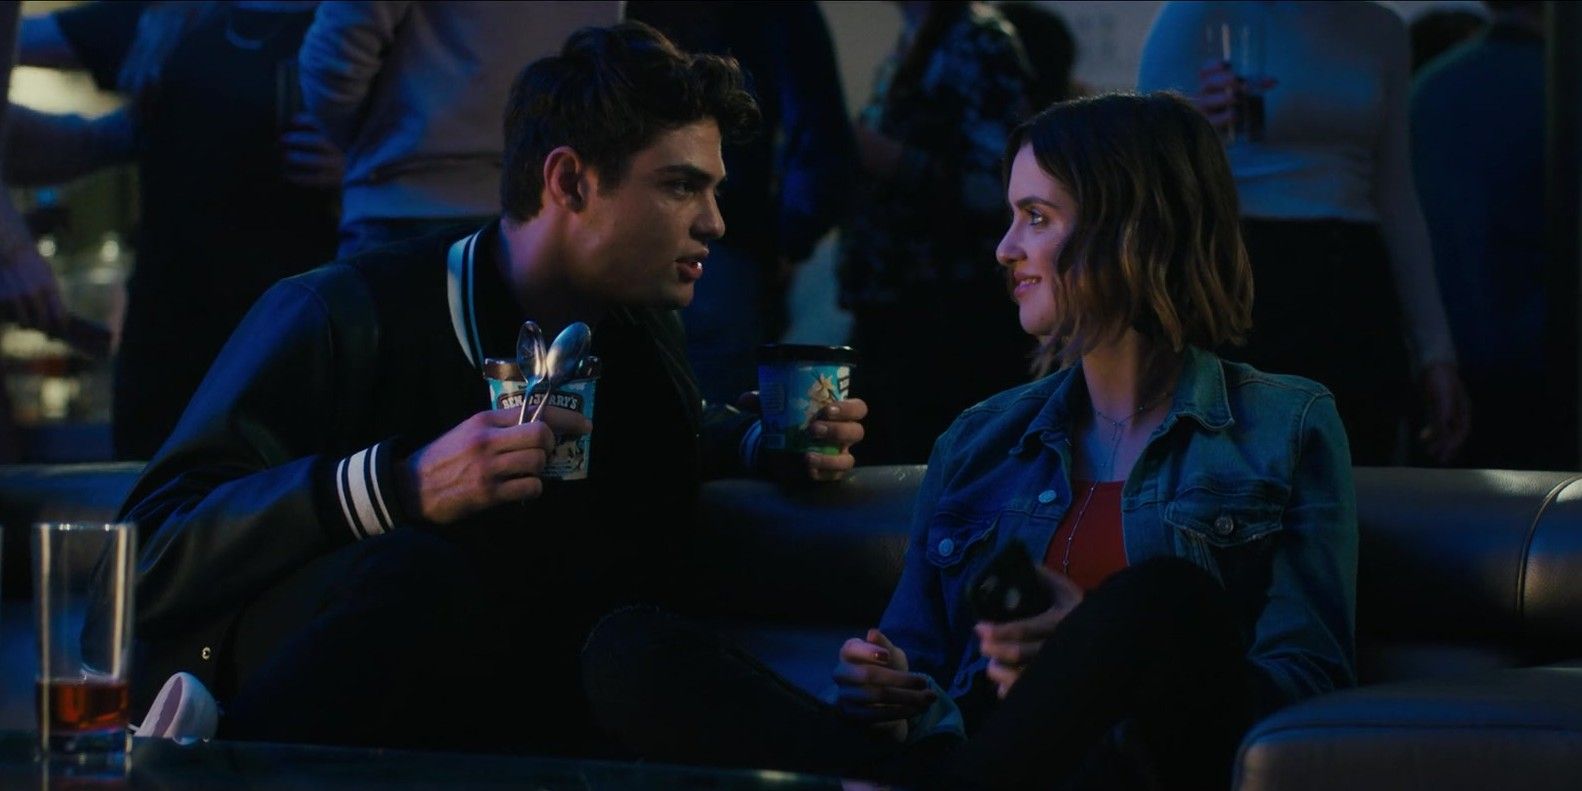 The Perfect date lead couple share ice cream and talk